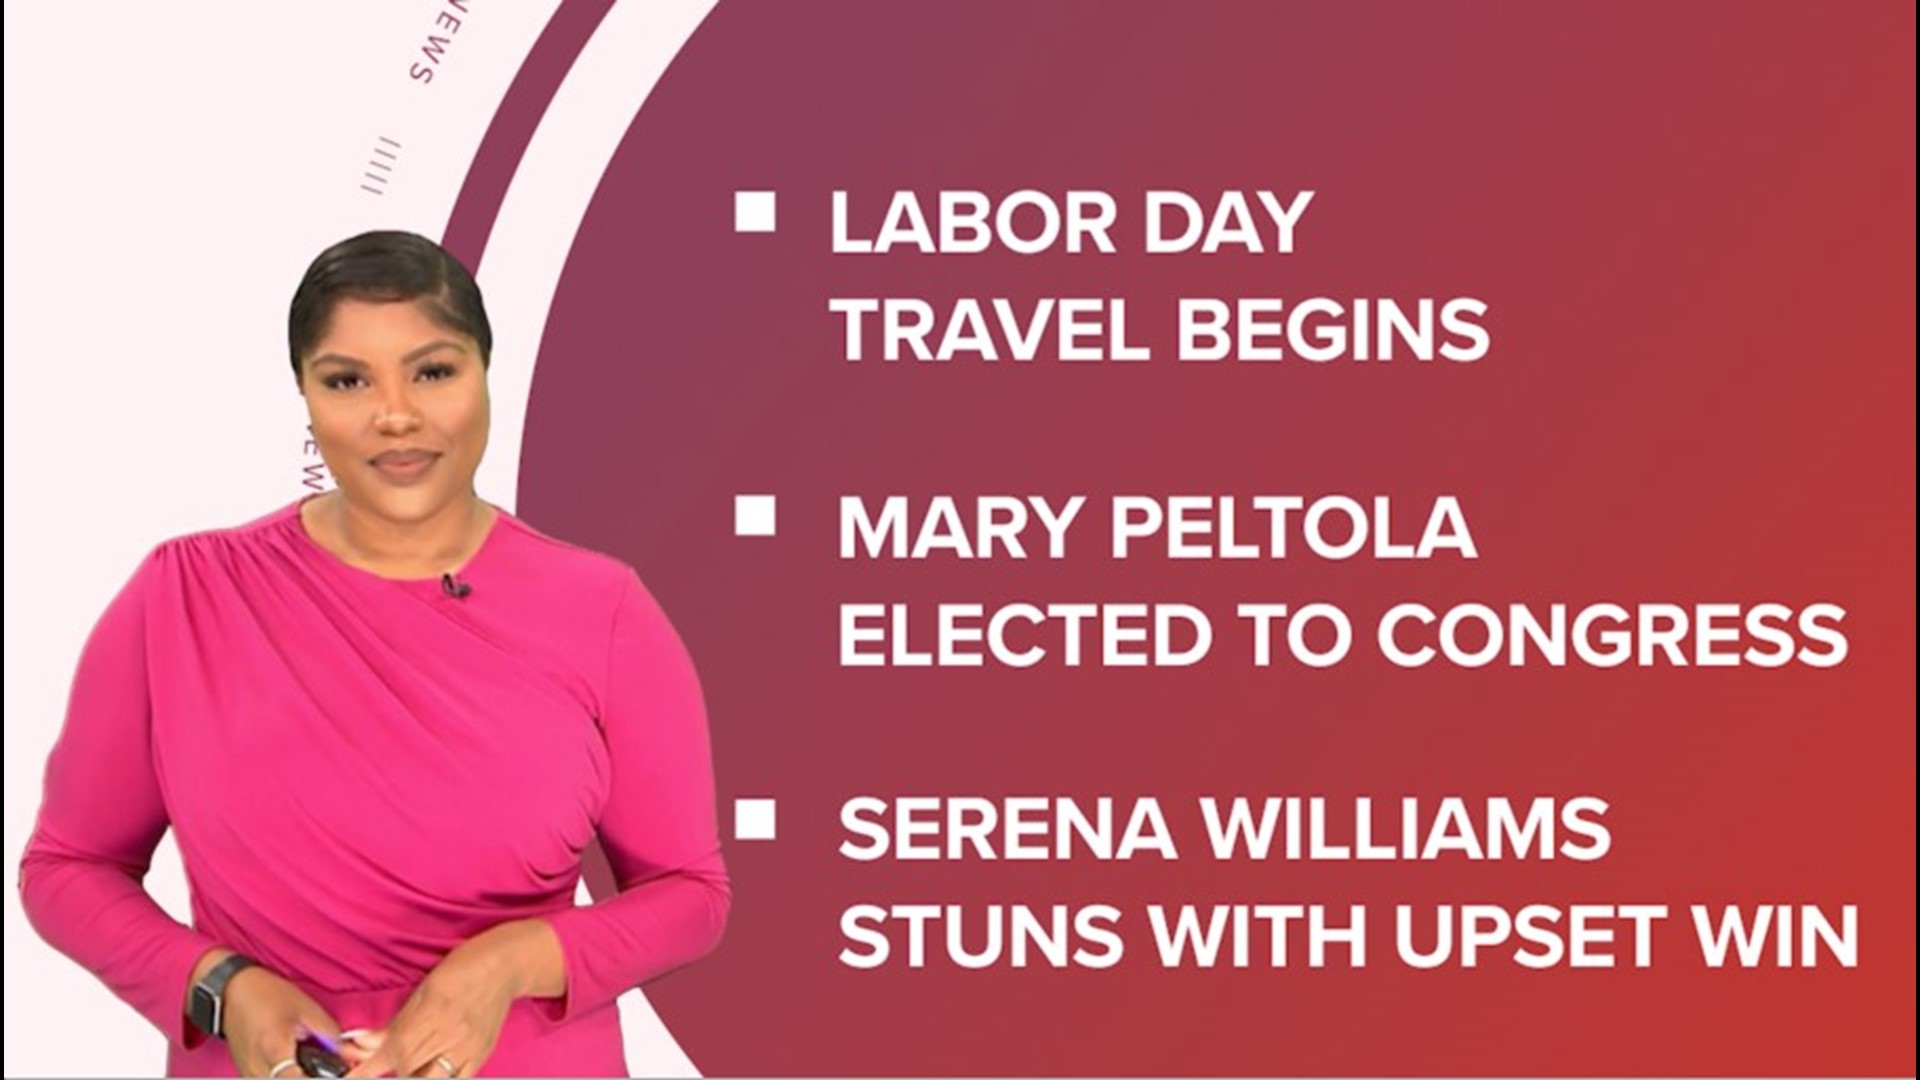 A look at what is happening in the news from a busy travel weekend ahead to Serena Williams upset win and an Alaskan Democrat beating Sarah Palin for Congress.